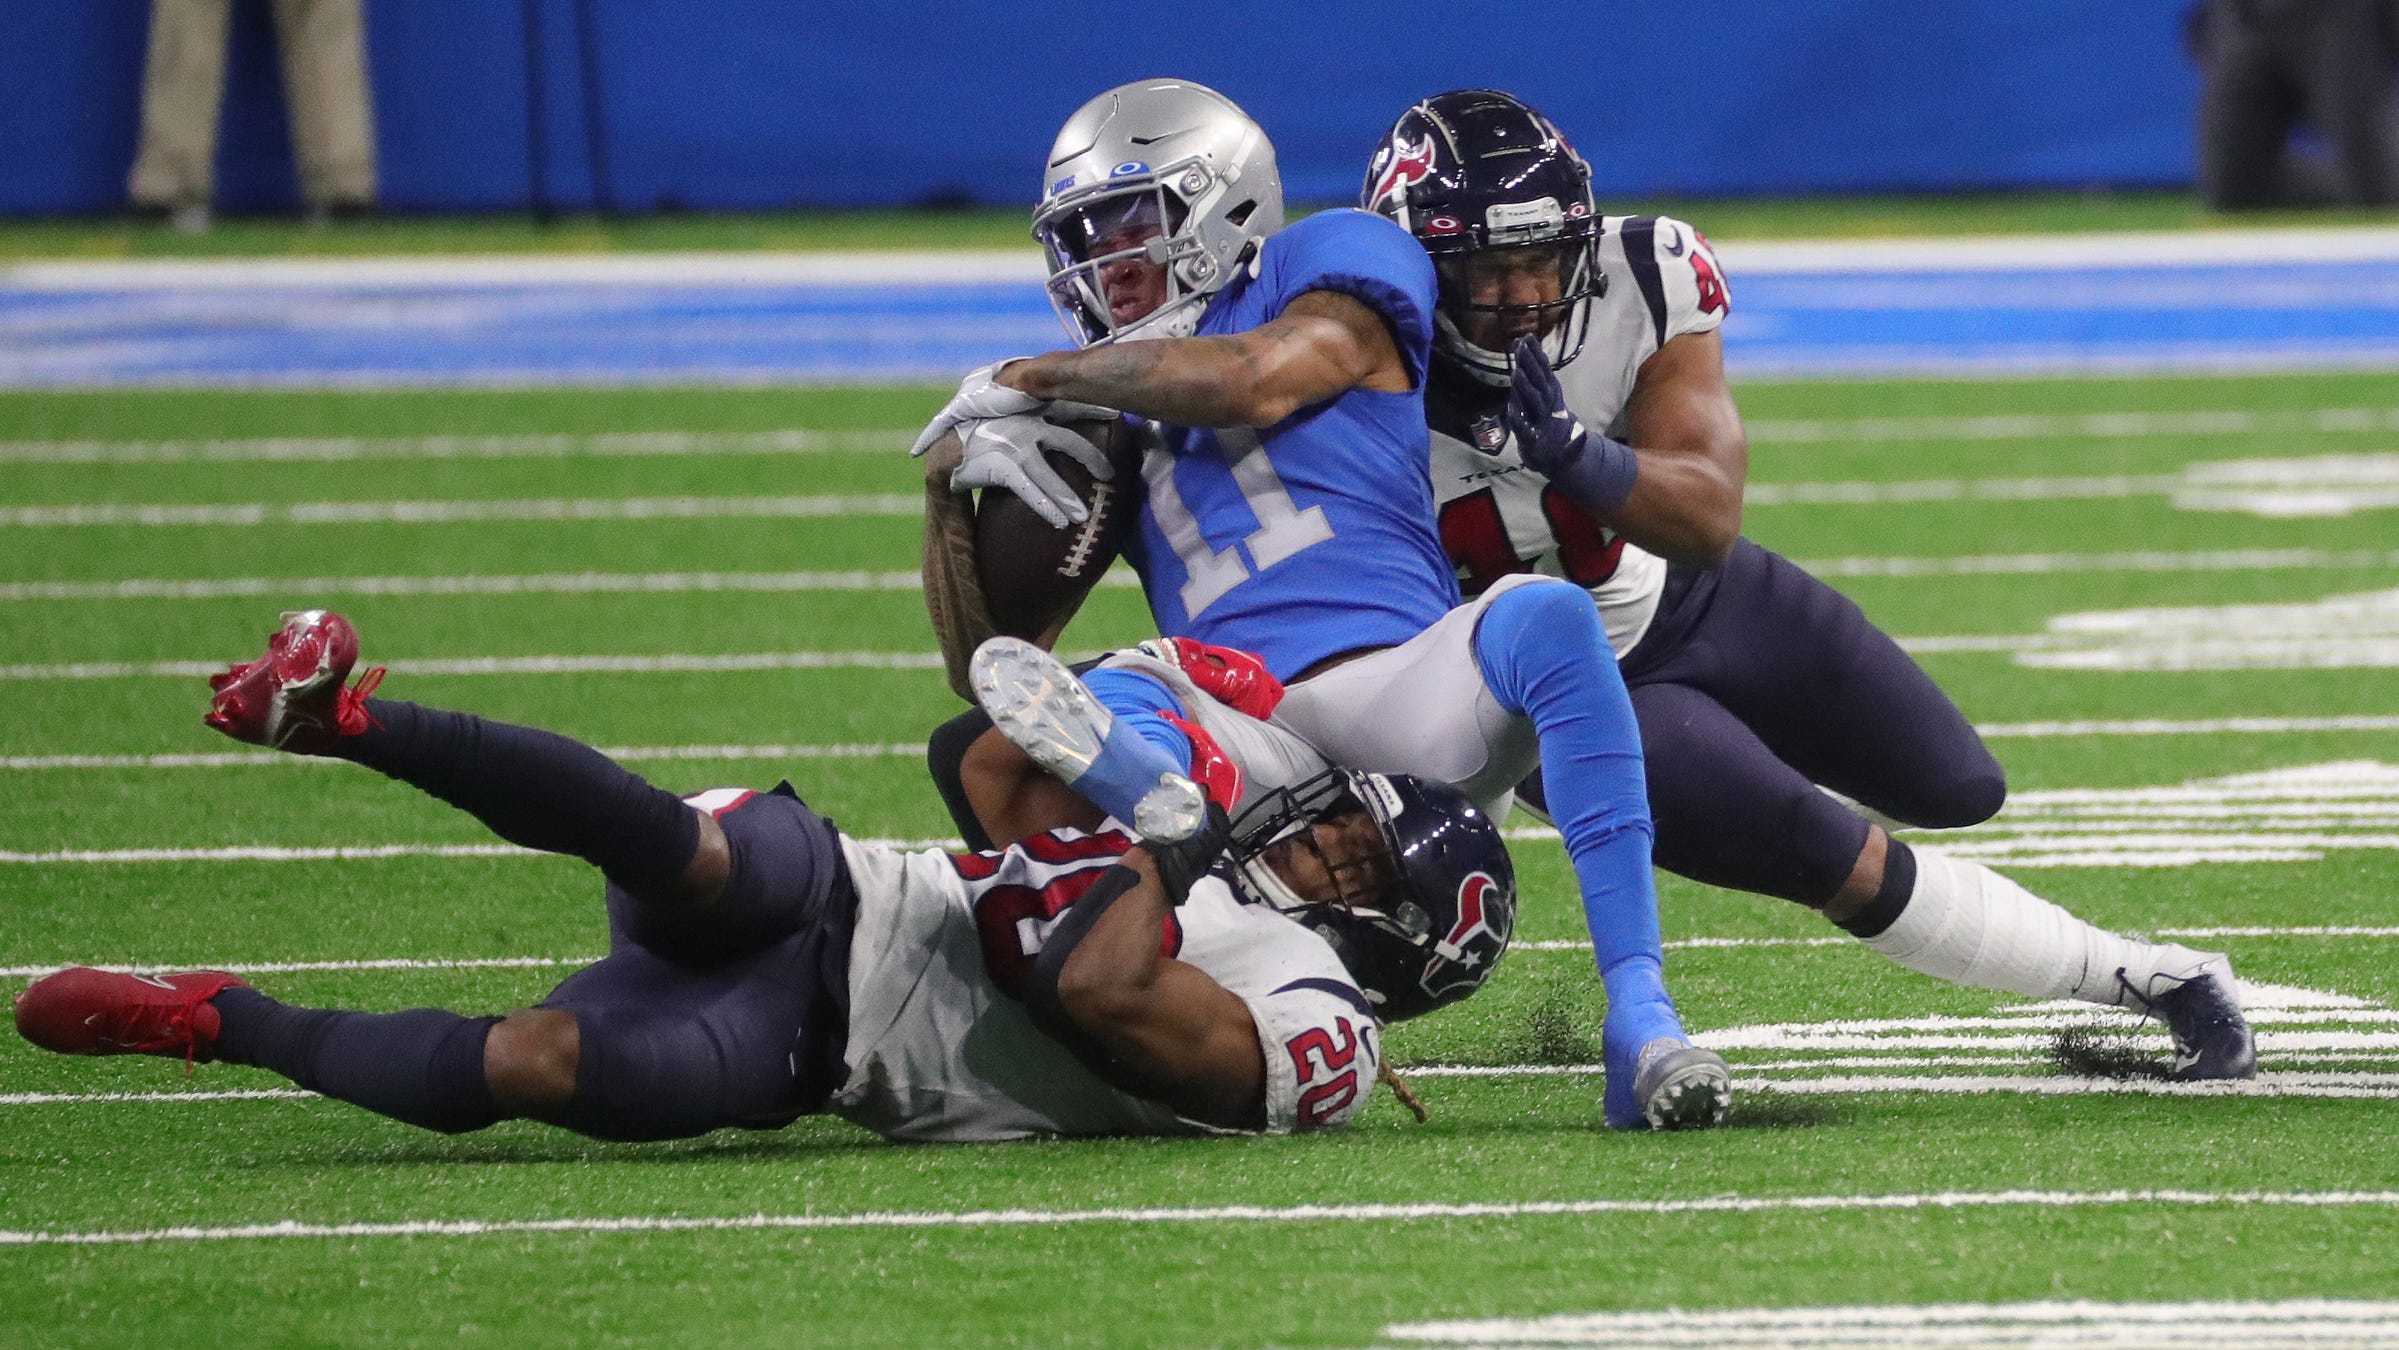 Lions wide receiver Marvin Jones makes a catch against Texans strong safety Justin Reid, left, and linebacker Nate Hall during the second half of the Lions' 41-25 loss at Ford Field Thursday, Nov. 26, 2020.